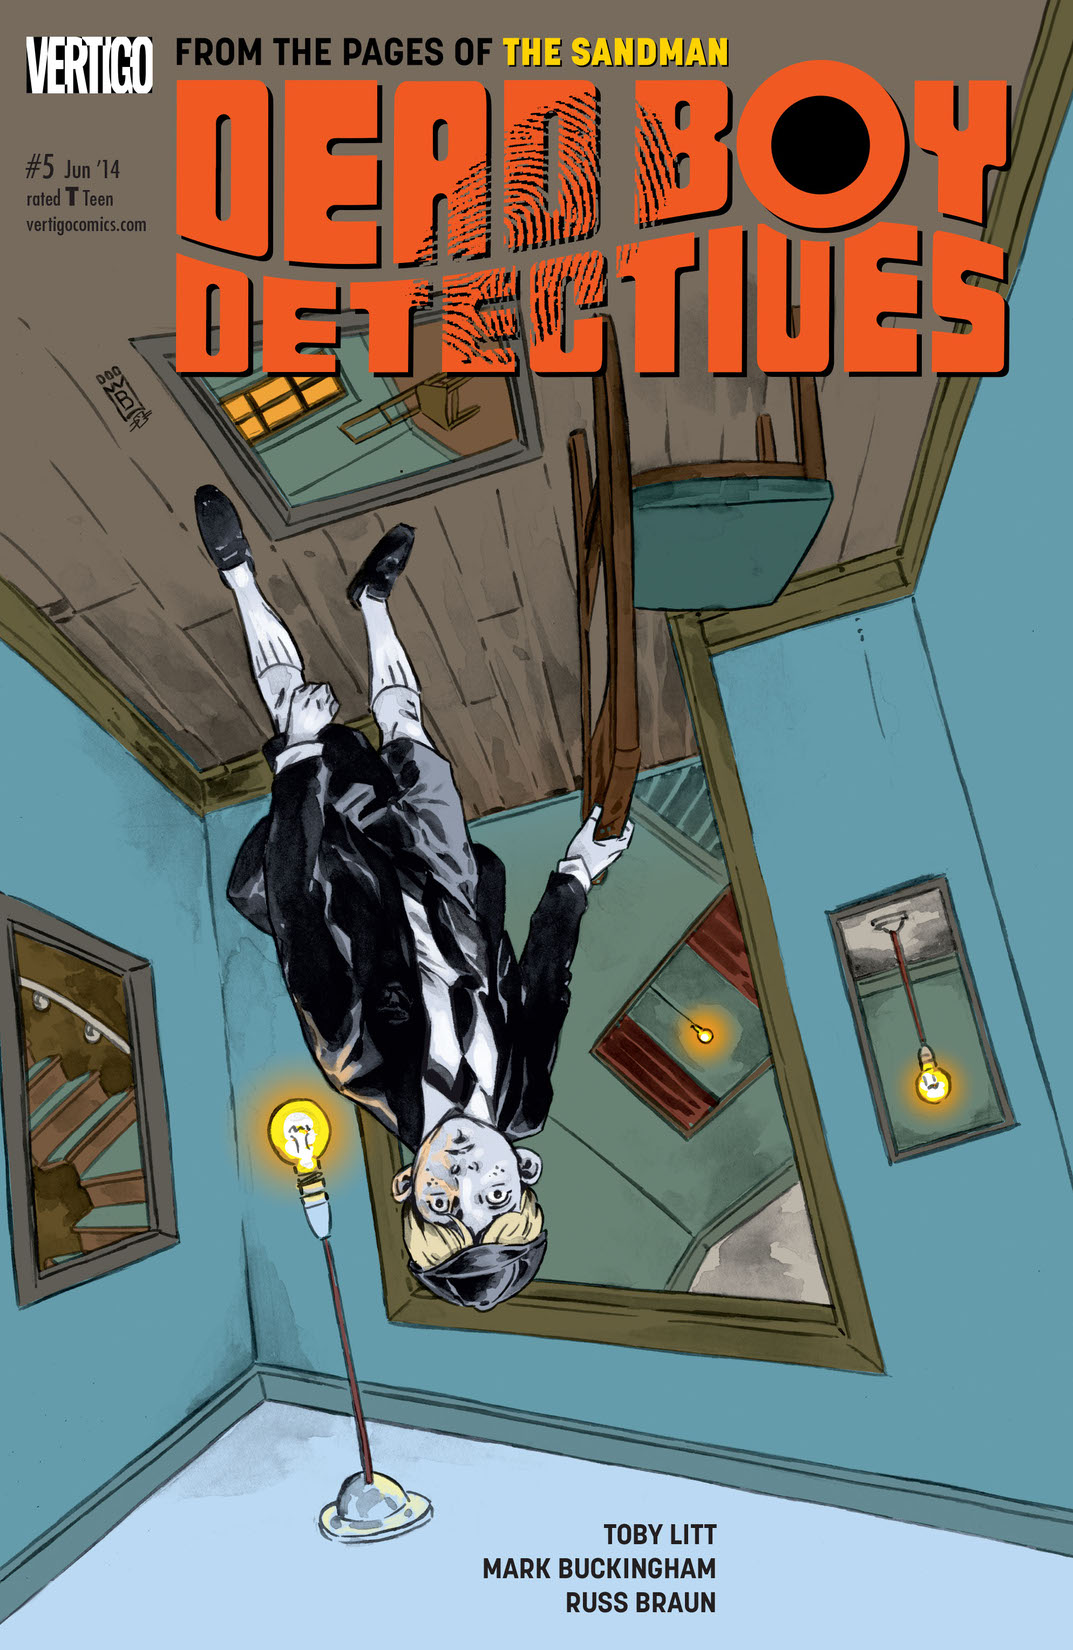 The Dead Boy Detectives #5 preview images